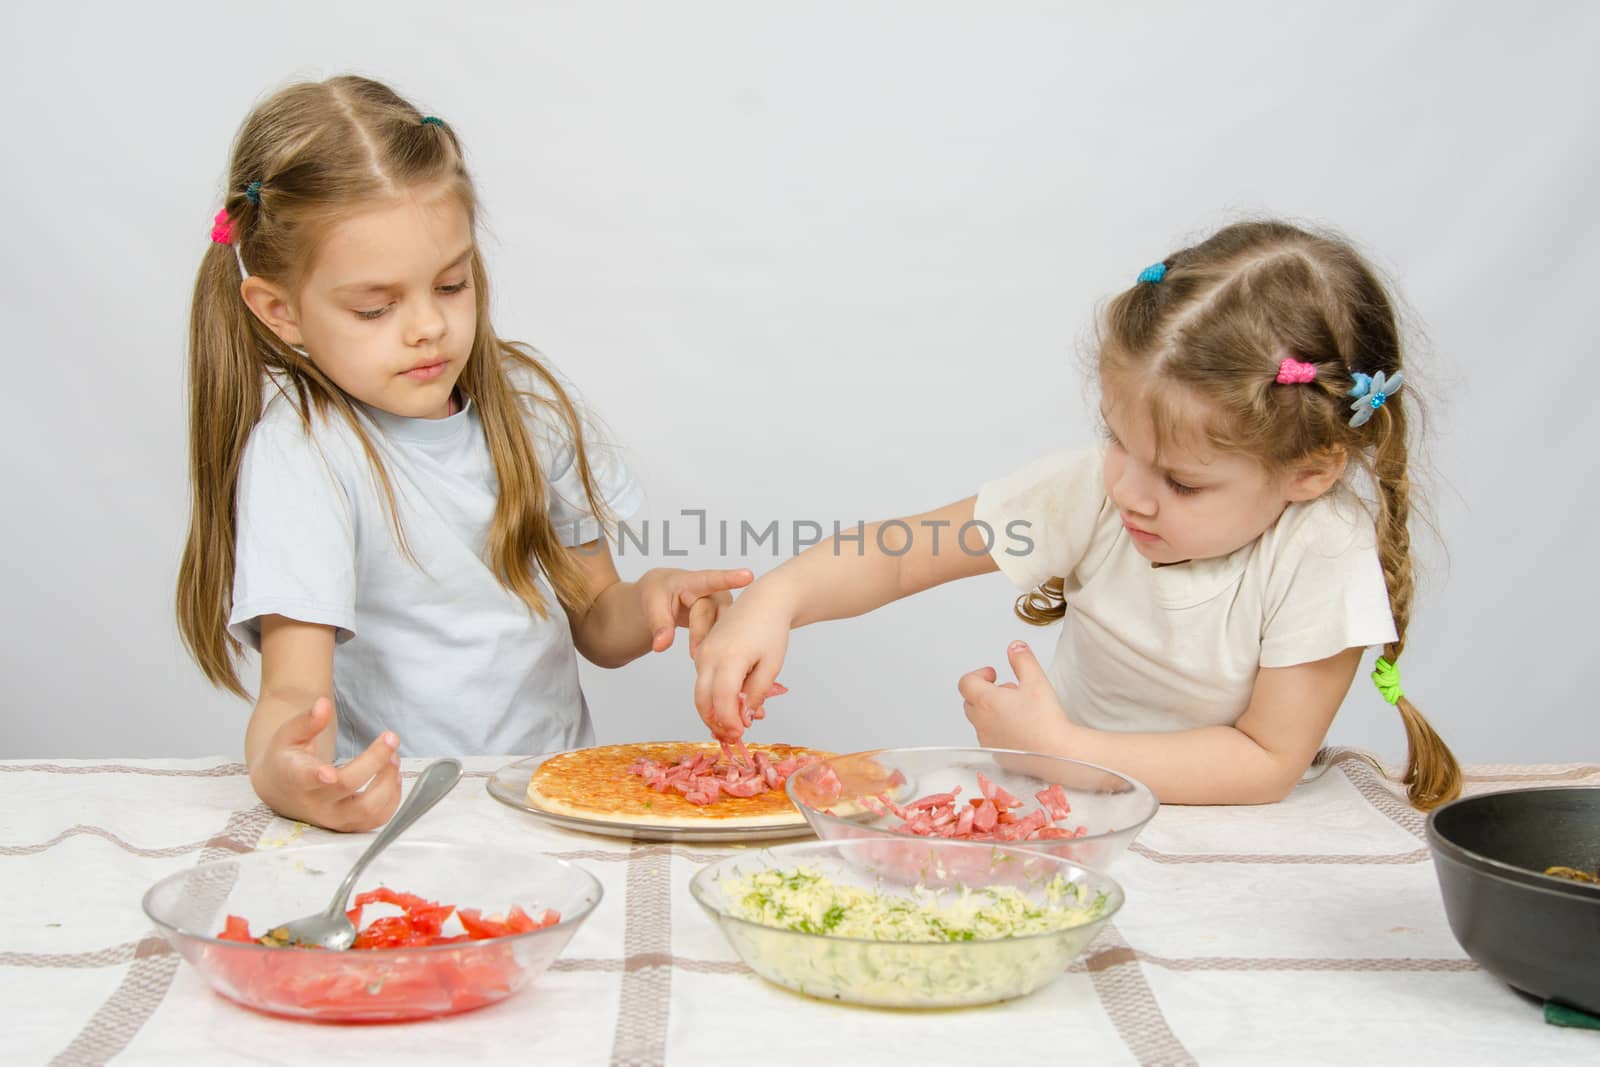 Six-year girl observes and controls her younger sister puts on the pizza ingredients